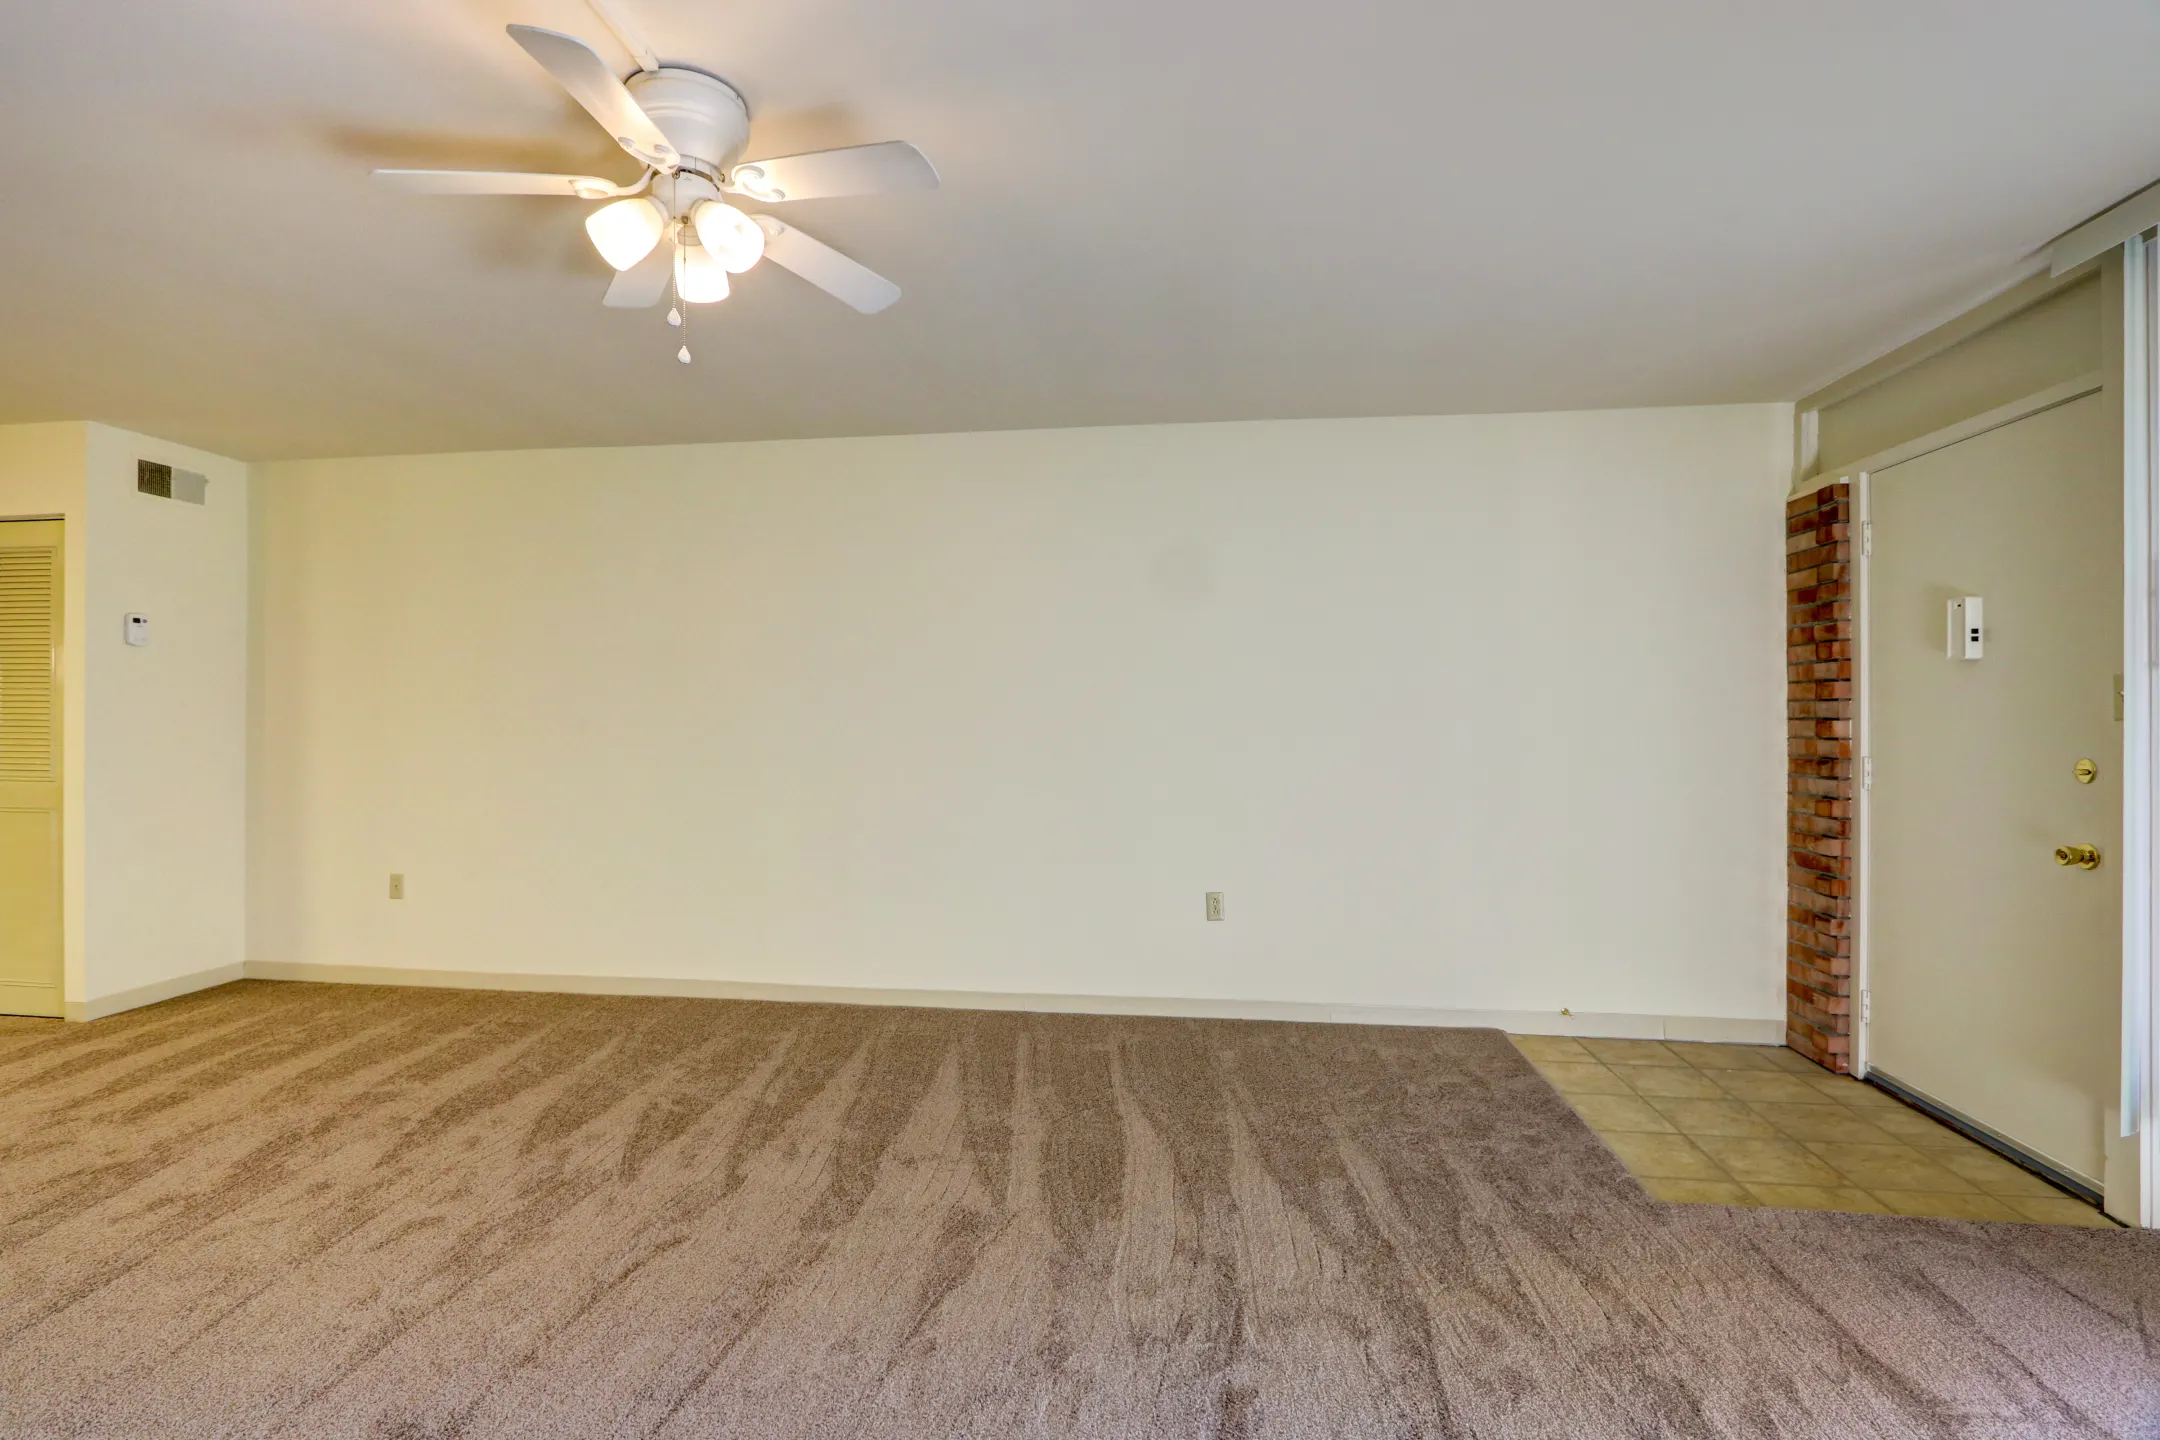 Bedroom - The Apartments on 2nd Street - Cuyahoga Falls, OH